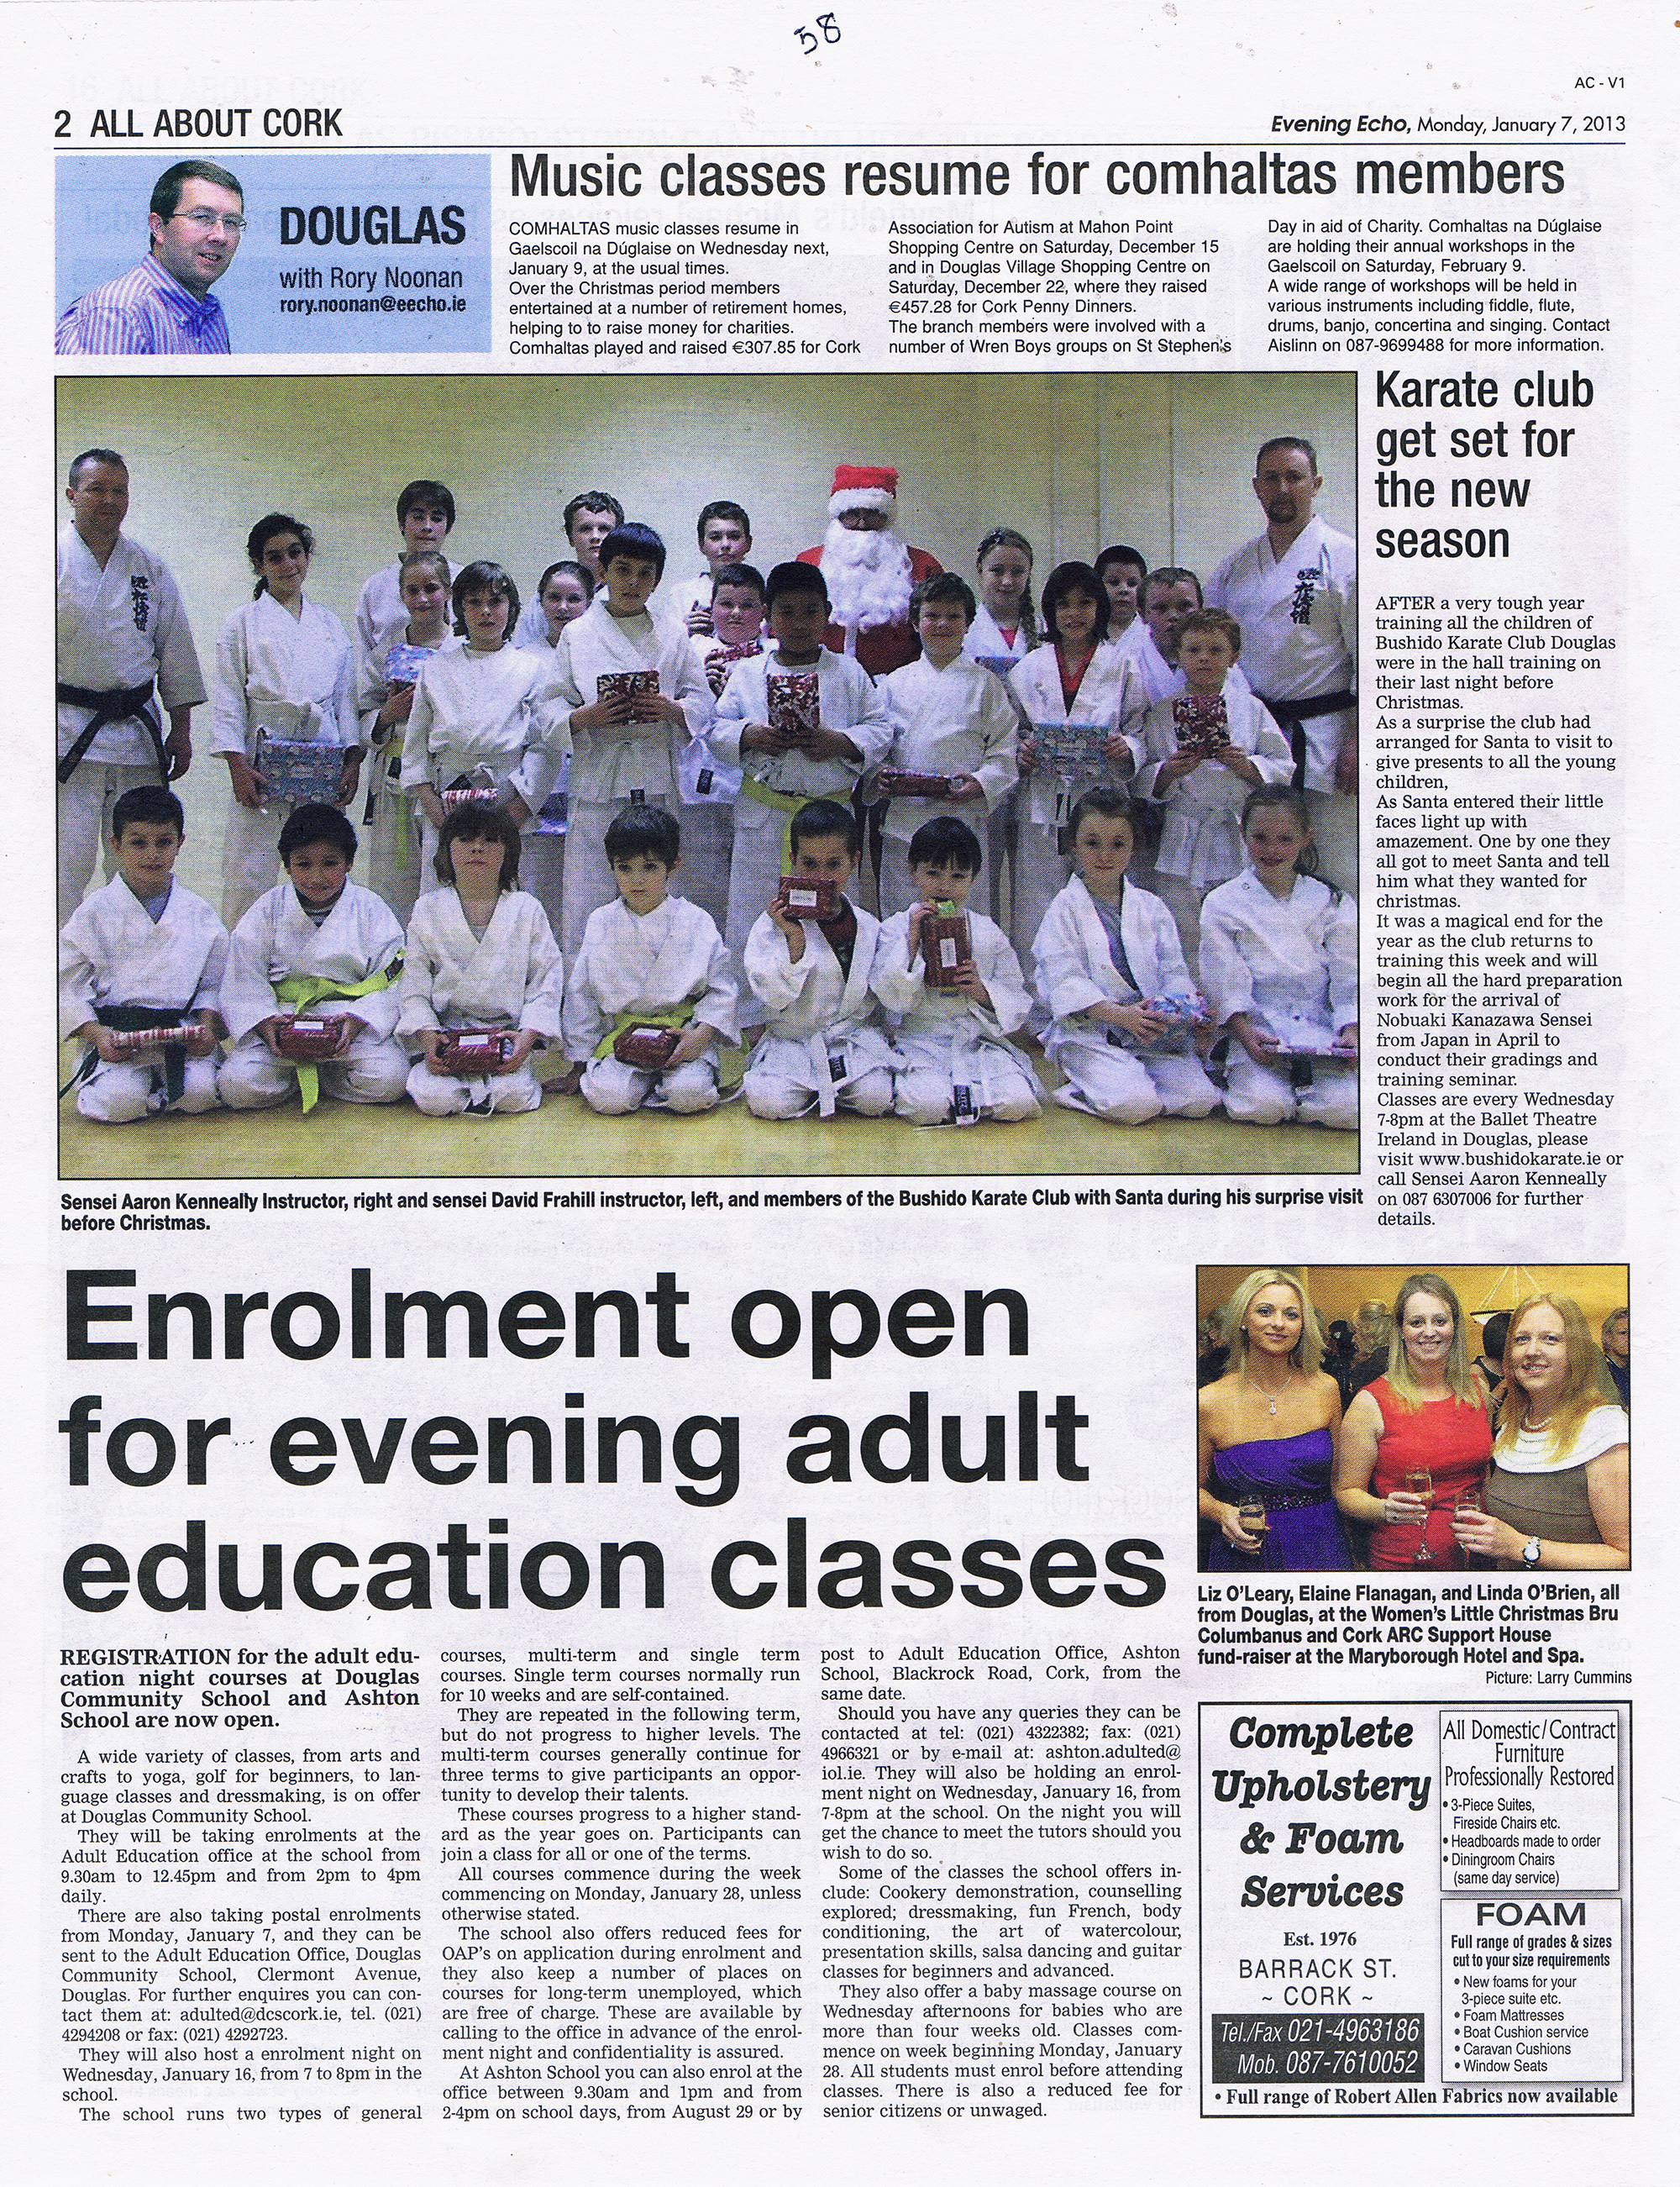 Evening Echo Christmas Feature - Karate club get set for the new season